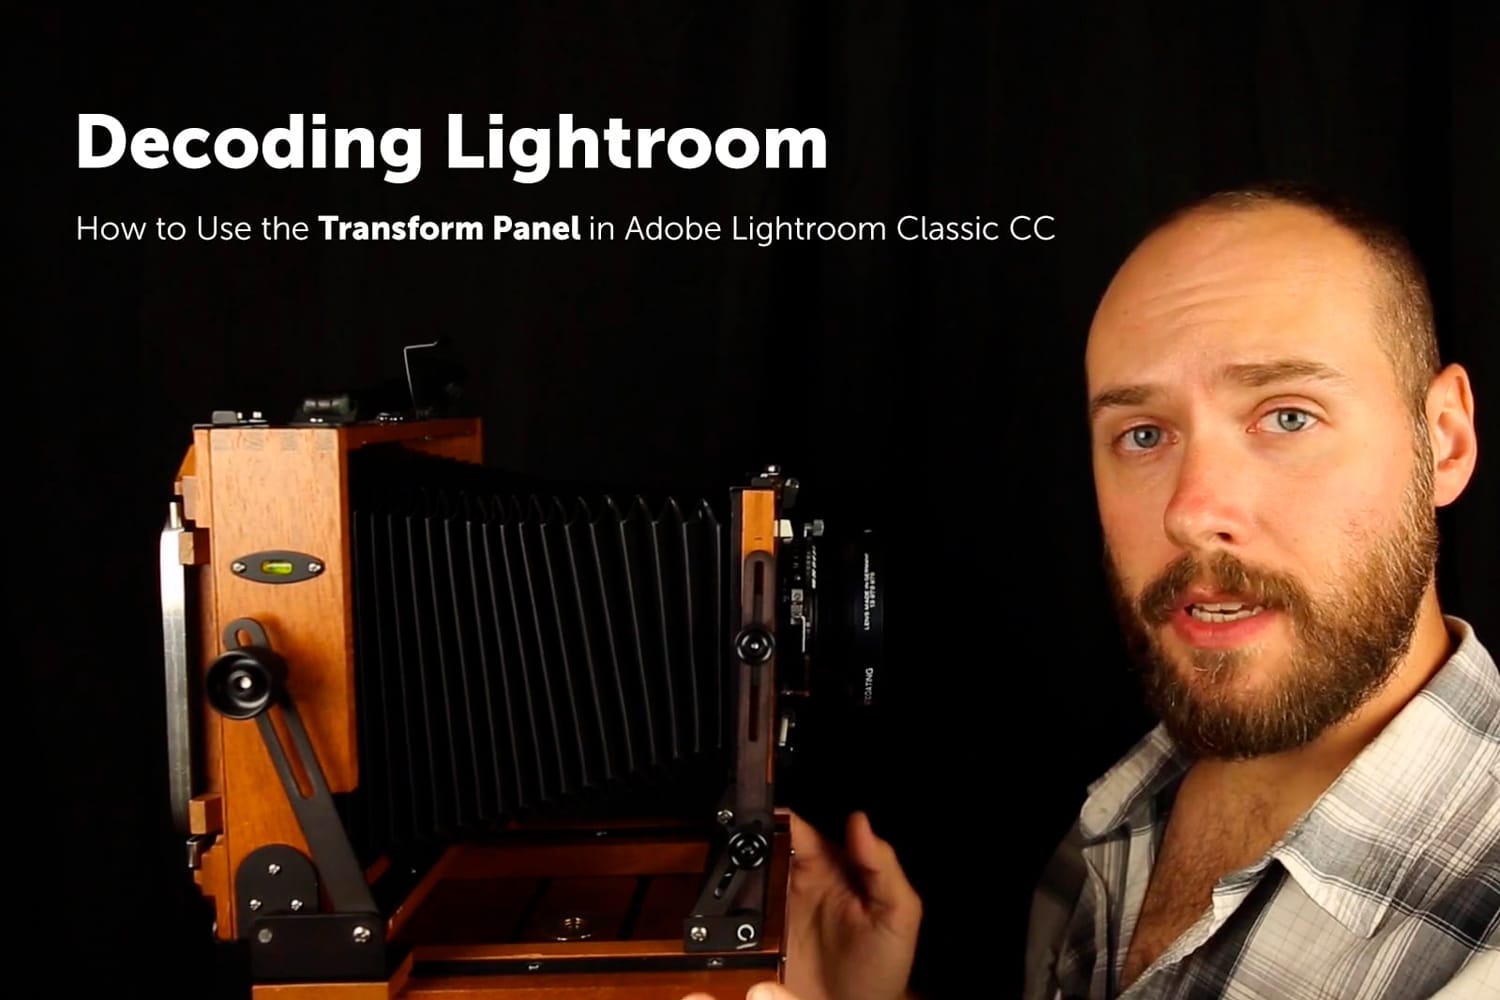 How to Use the Transform Panel in Lightroom Classic